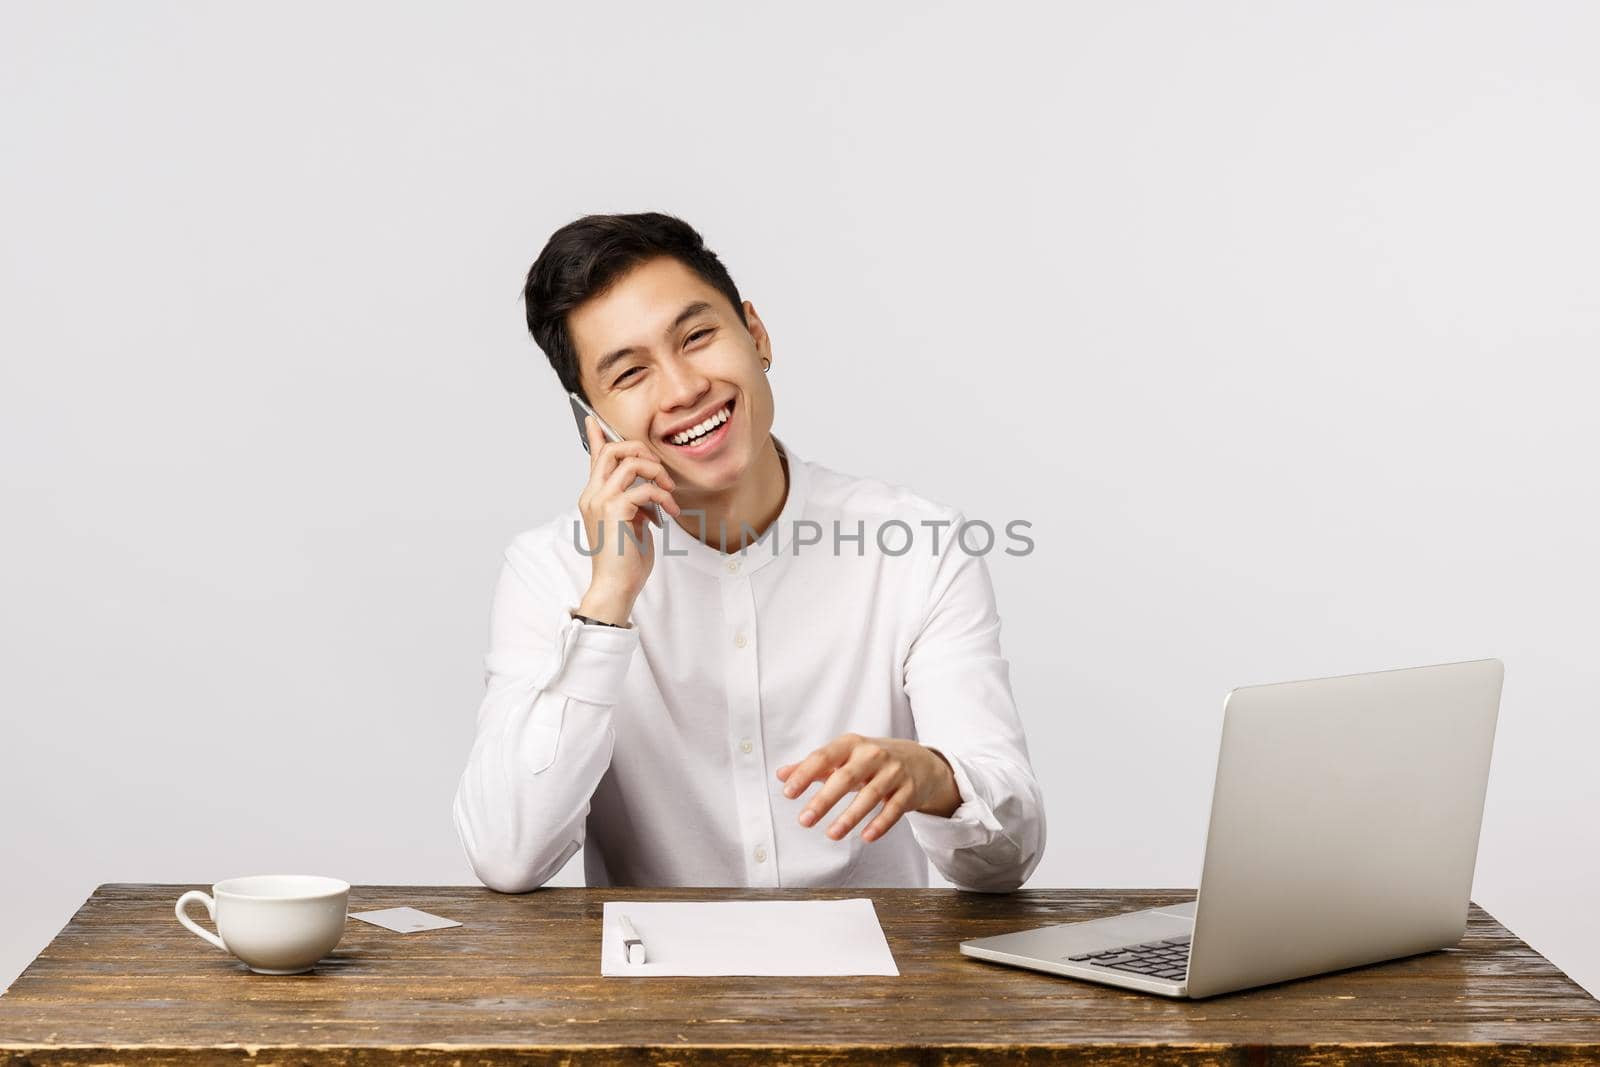 Carefree, smiling happy young asian businessman in office, sitting with laptop, documents, calling friend, talking and laughing as holding smartphone near ear, white background. Copy space